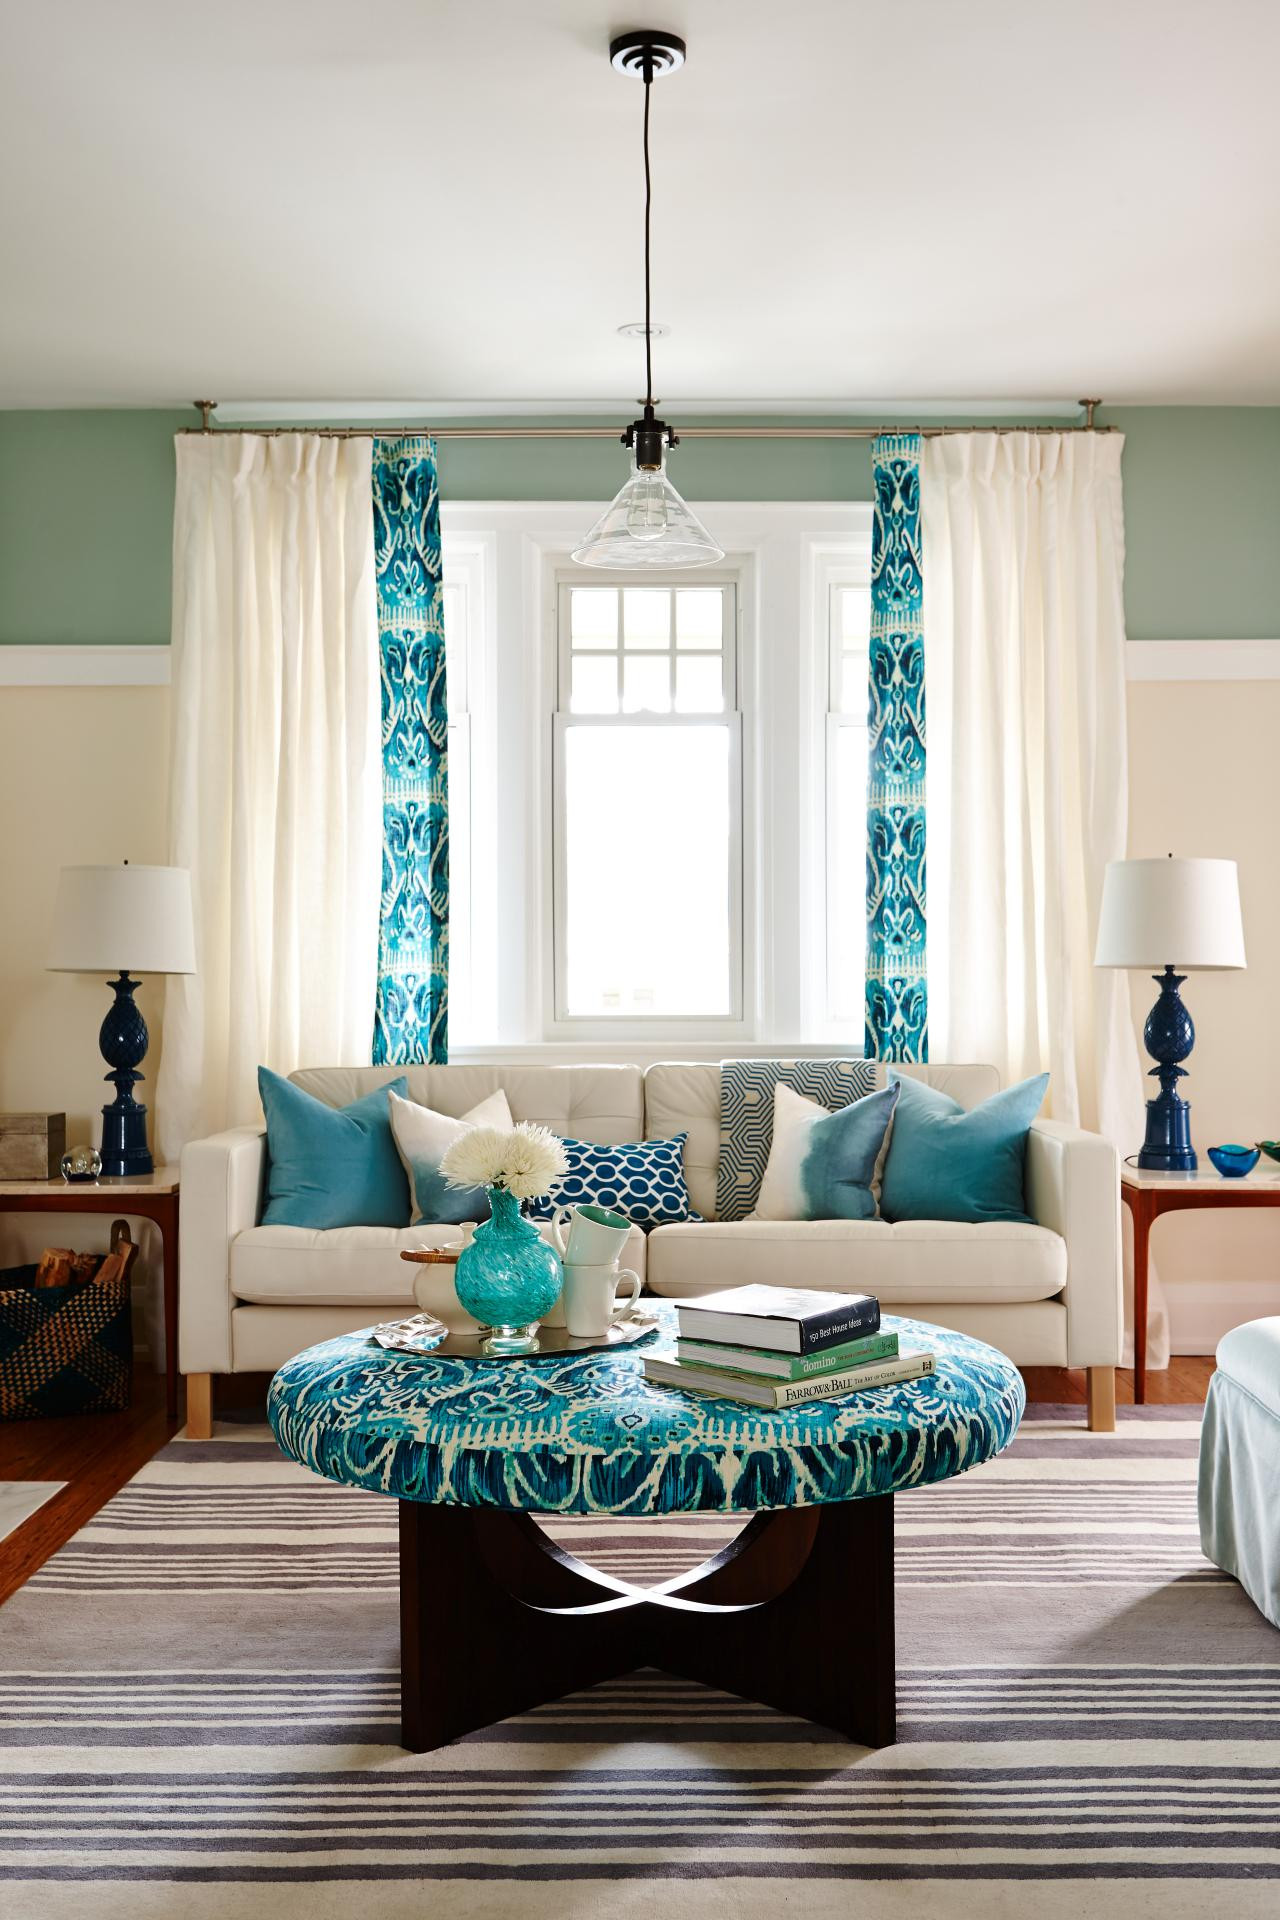 Turquoise Living Room Decorations
 10 ideas for how to decorate your living room with